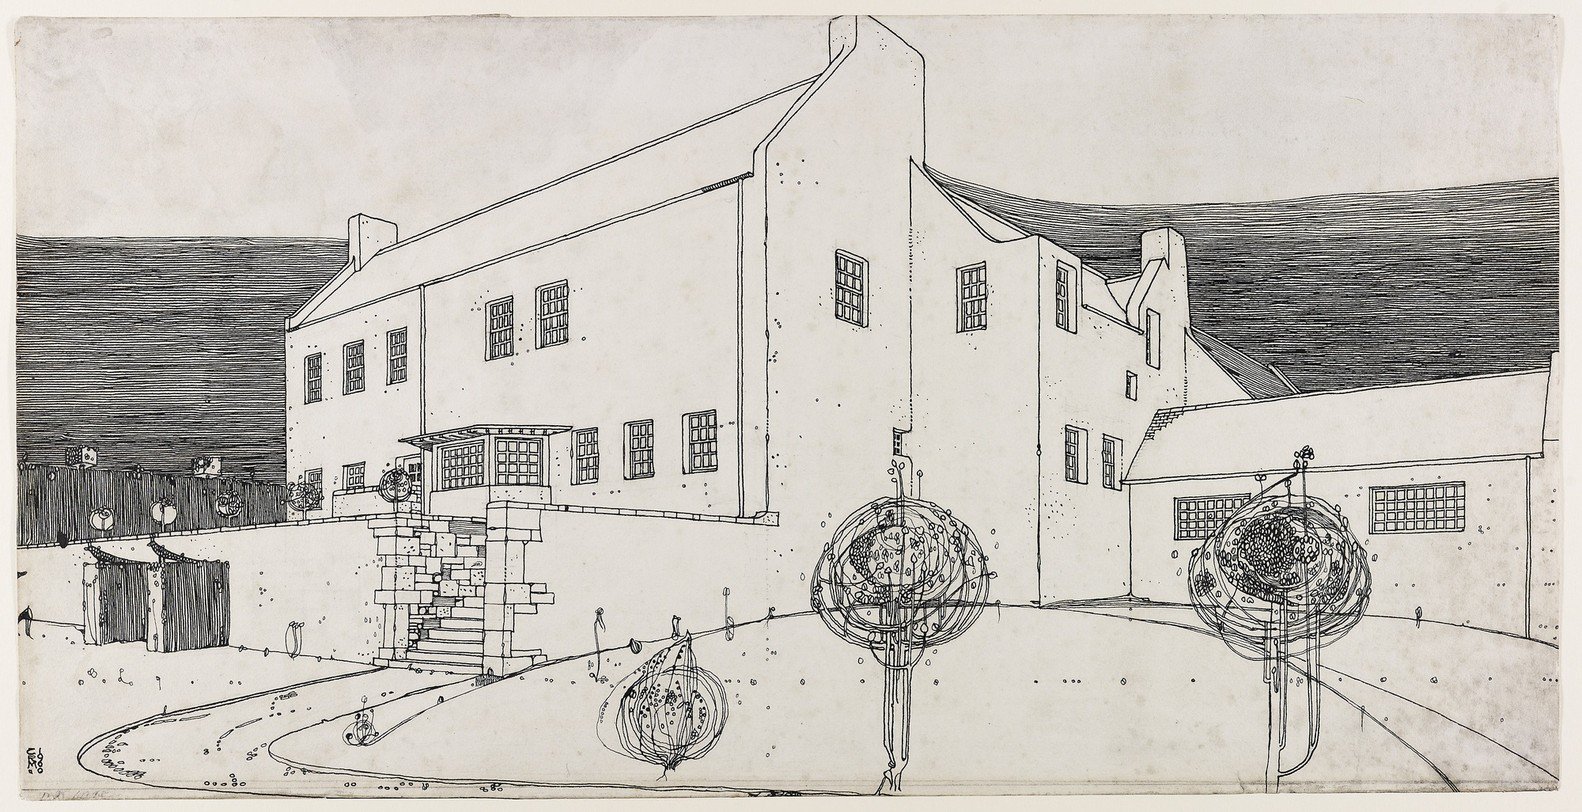 Drawing of a house near Glasgow designed by Mackintosh